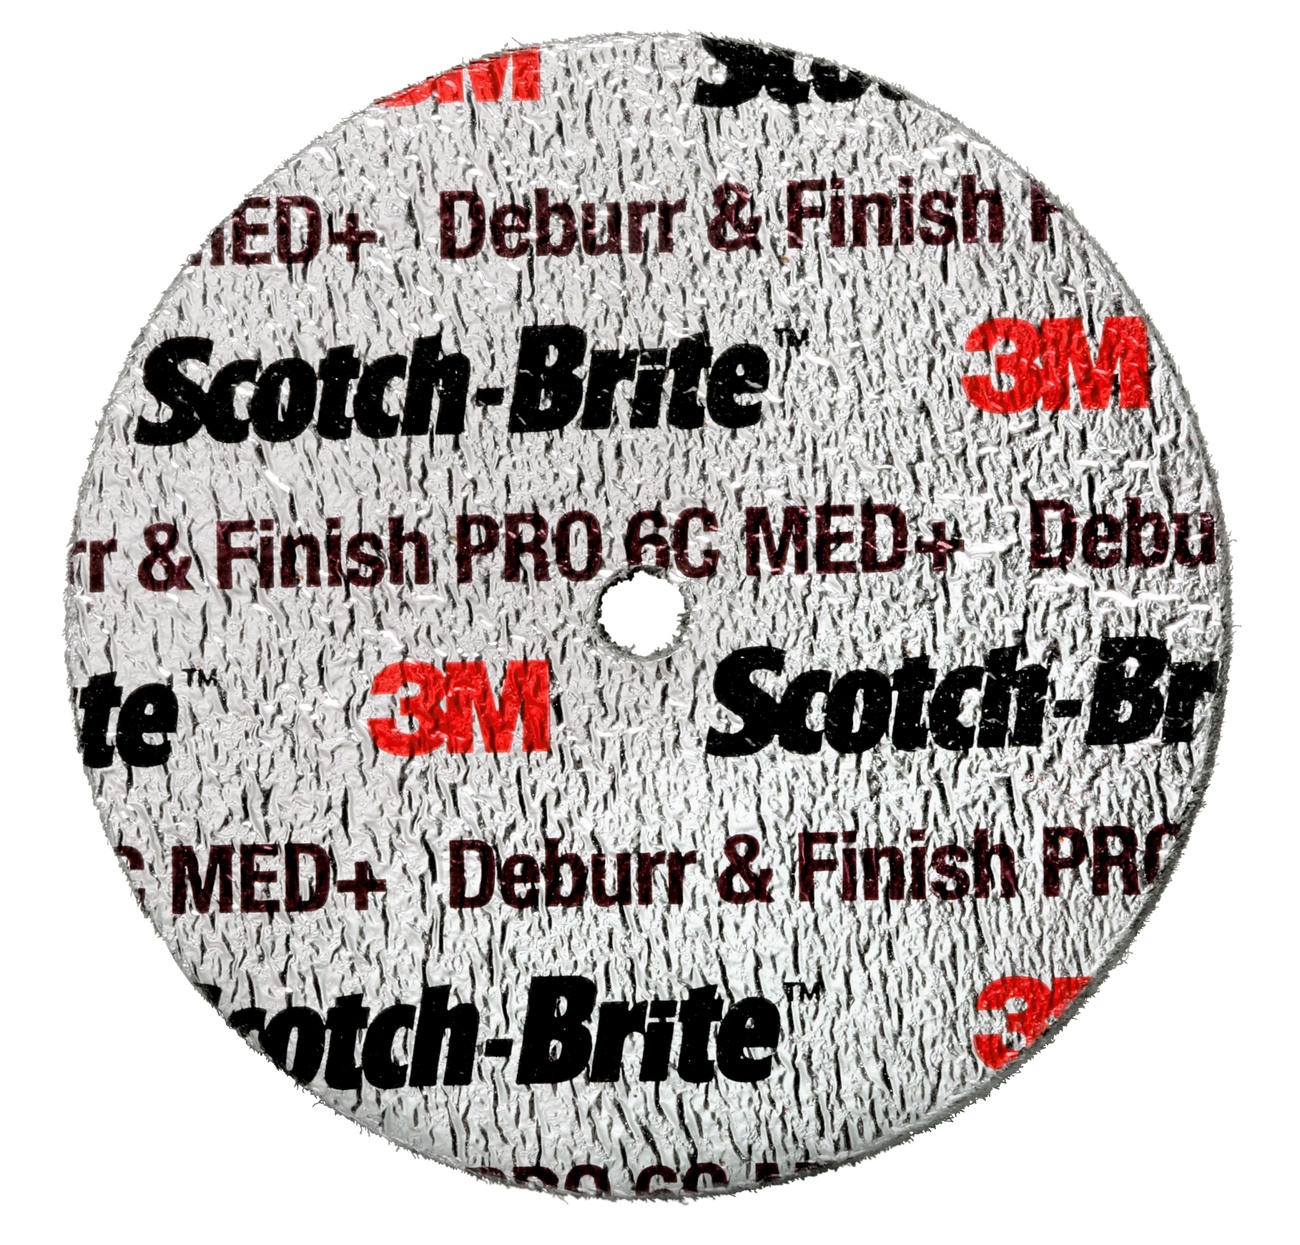 3M Scotch-Brite Deburr and Finish PRO compact disc DP-UW, 152 mm x 12.7 mm x 25.4 mm, 6C MED+, 4 WL